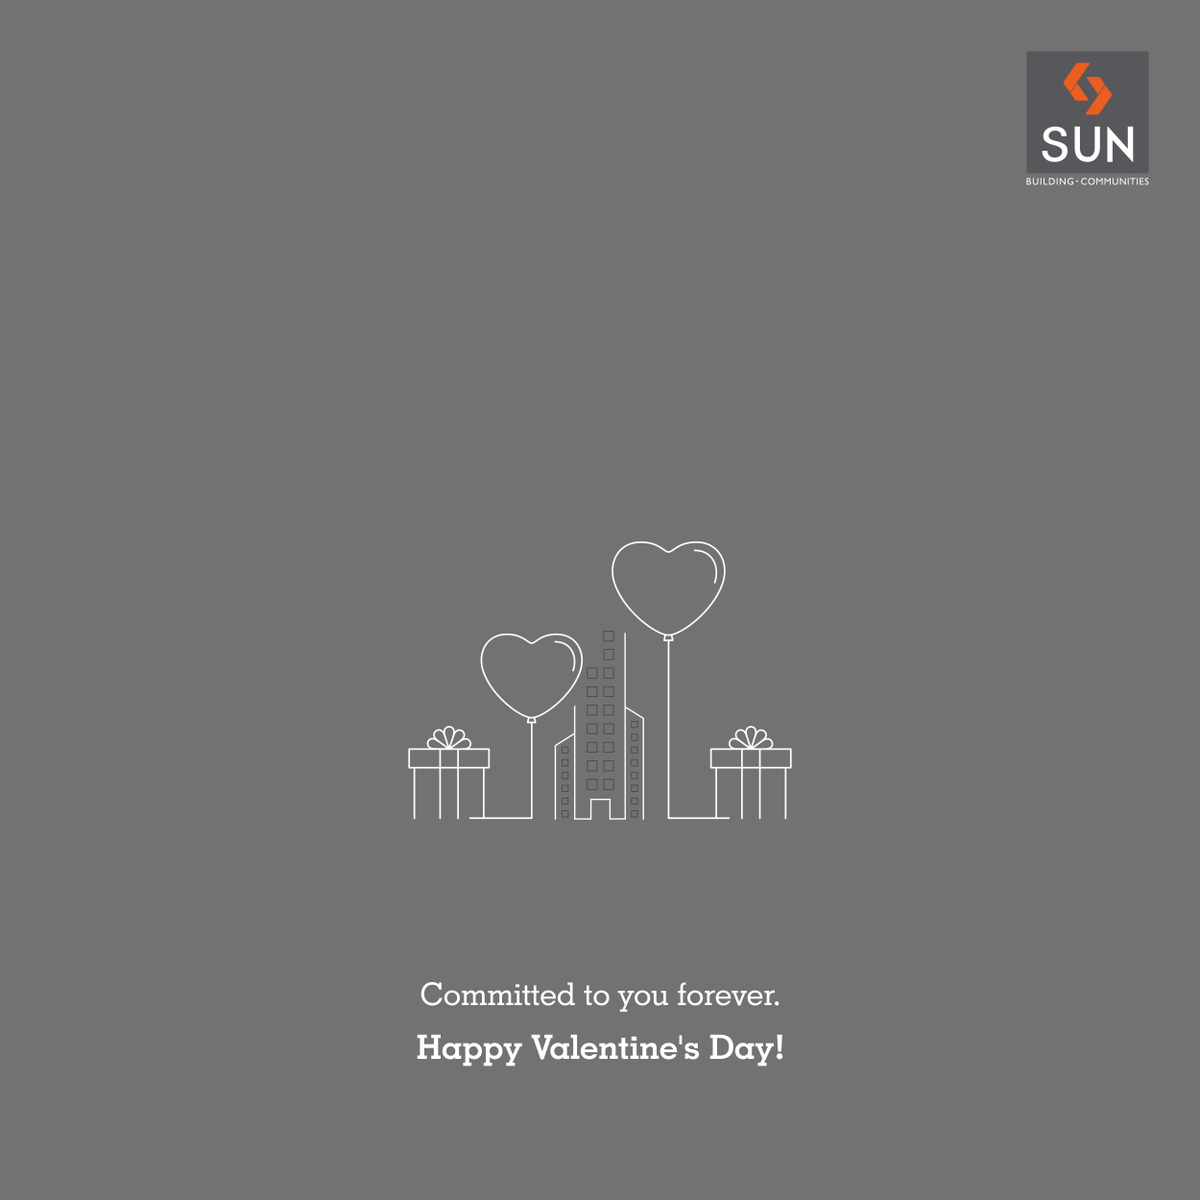 Declaring our relationship with you forever, #Sunbuilders wish you a #HappyValentinesDay! https://t.co/yKMJo611C8